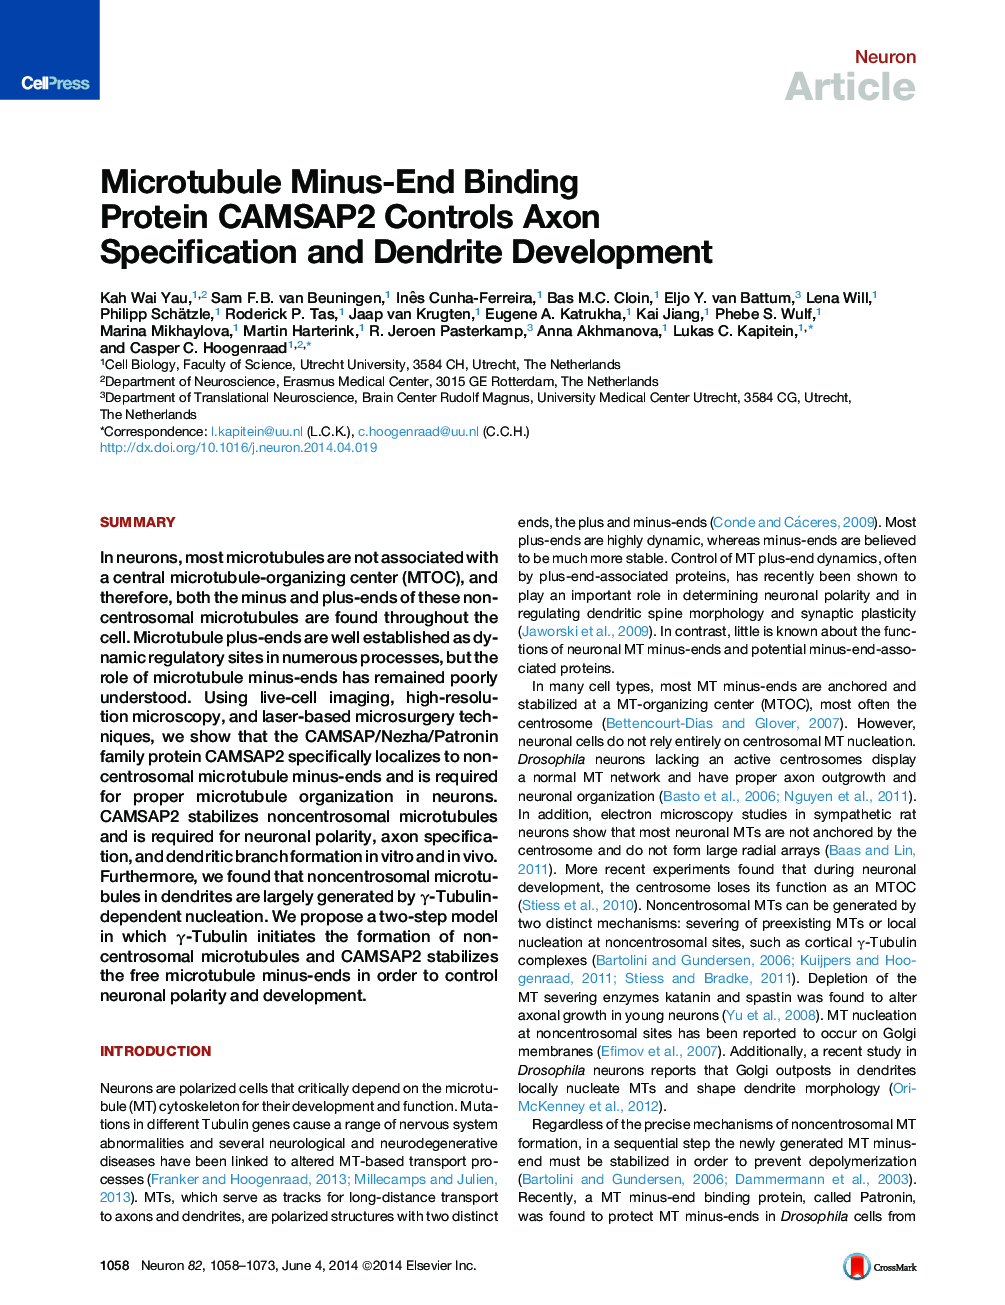 Microtubule Minus-End Binding Protein CAMSAP2 Controls Axon Specification and Dendrite Development